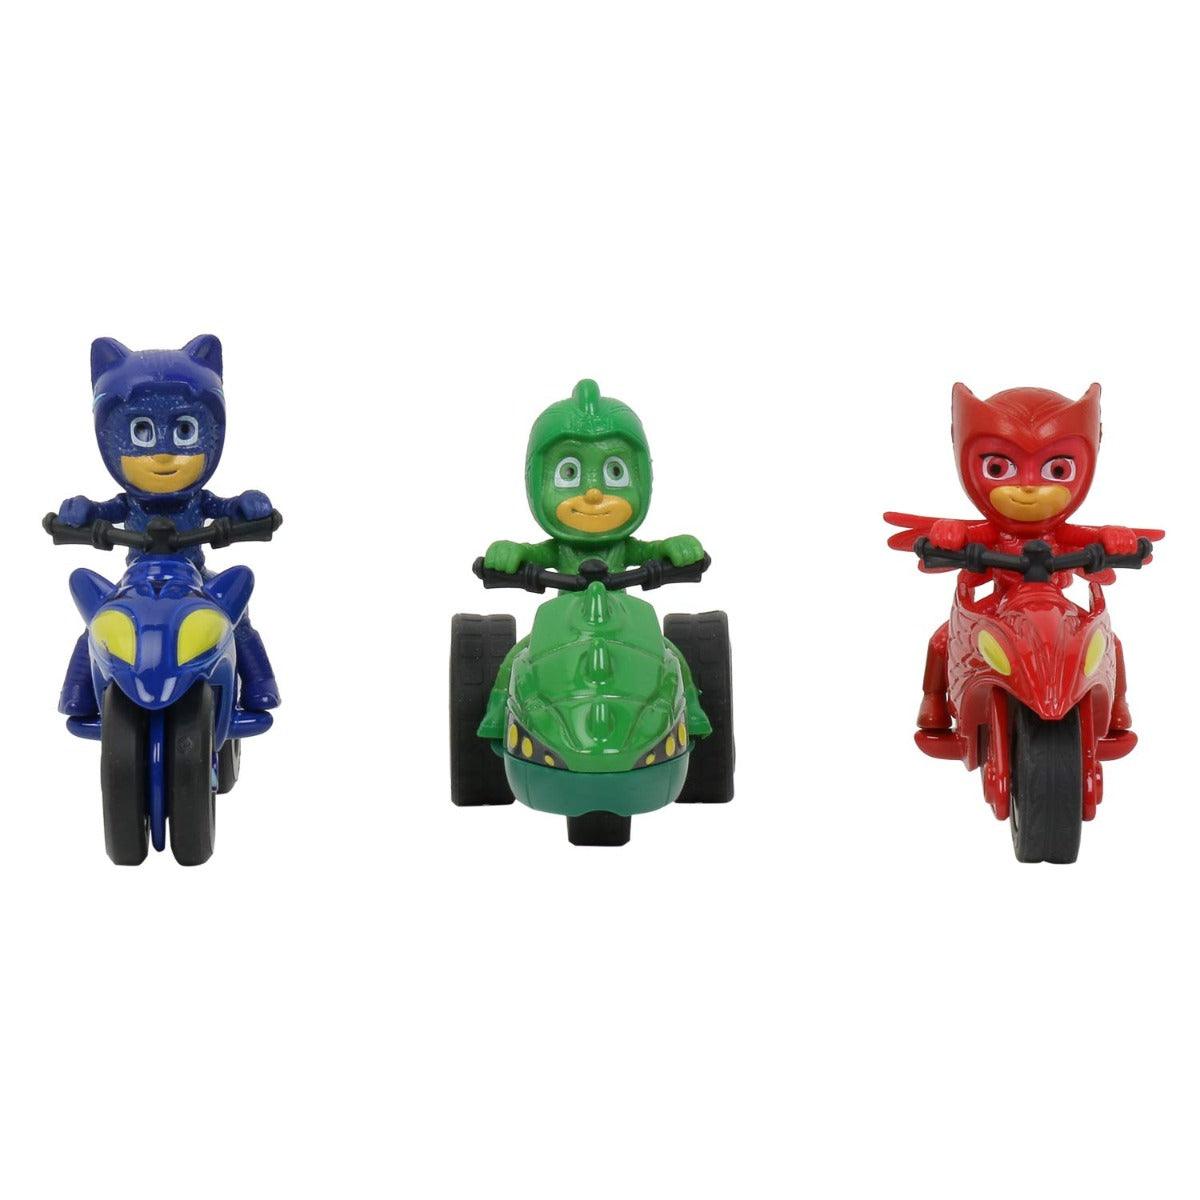 Dickie PJ Masks Moon Rover Design & Styles May Vary- Only 1 Car Included